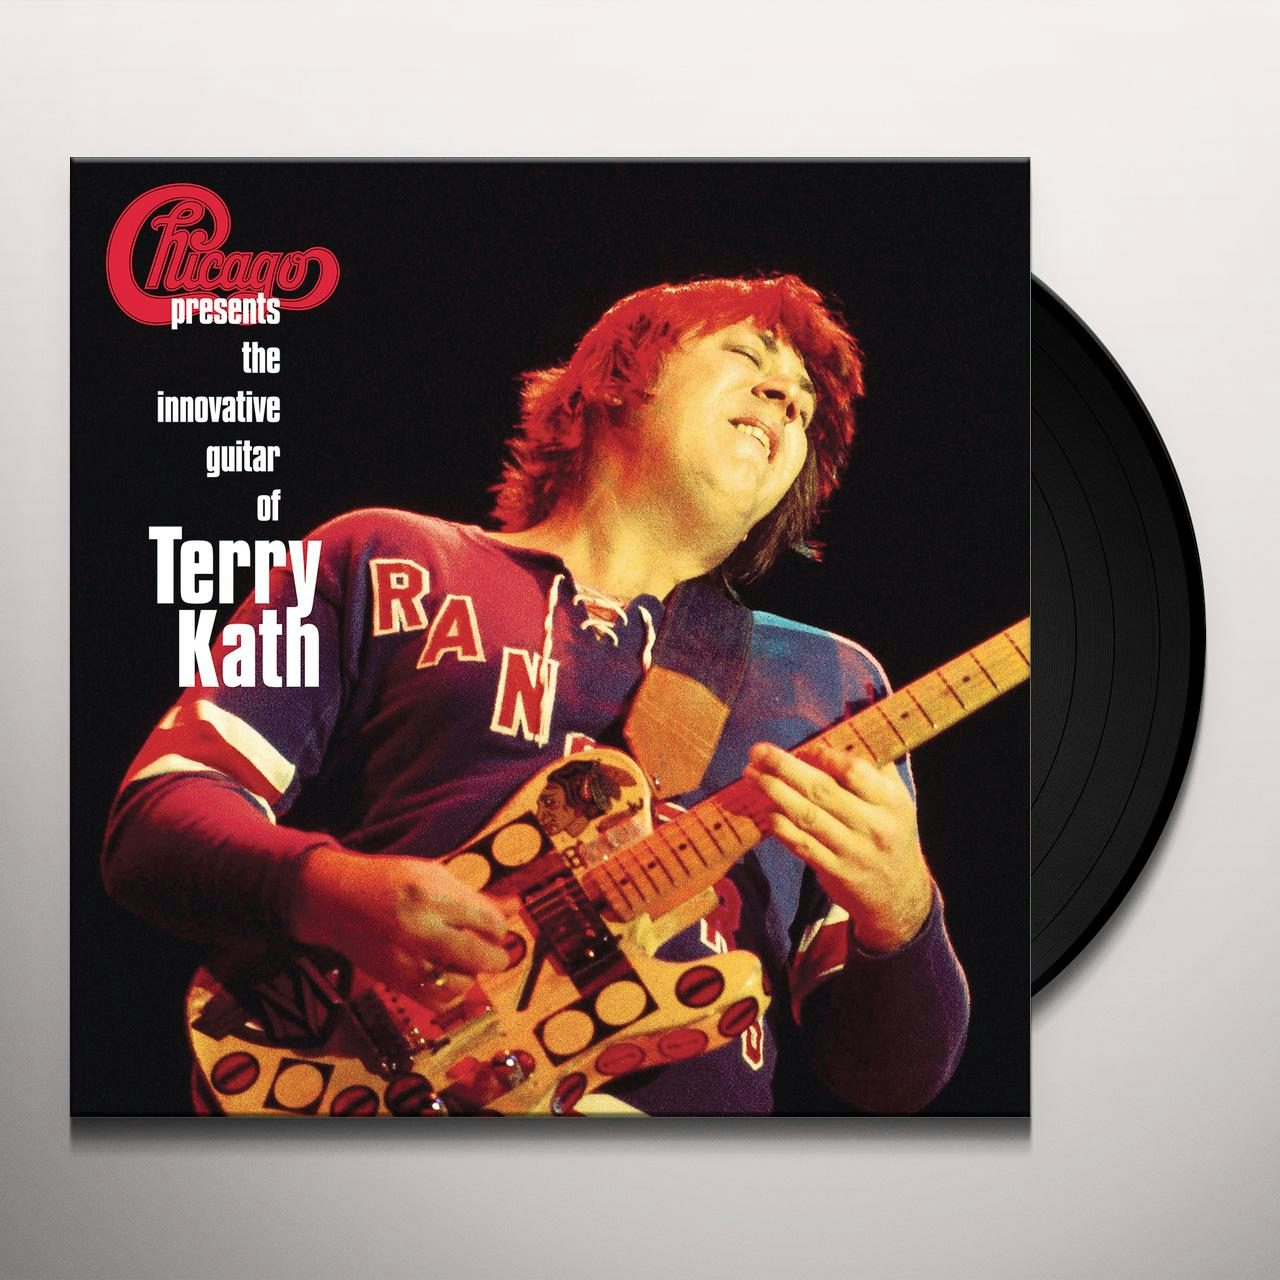 Chicago PRESENTS: INNOVATIVE GUITAR OF TERRY KATH Vinyl, 48% OFF